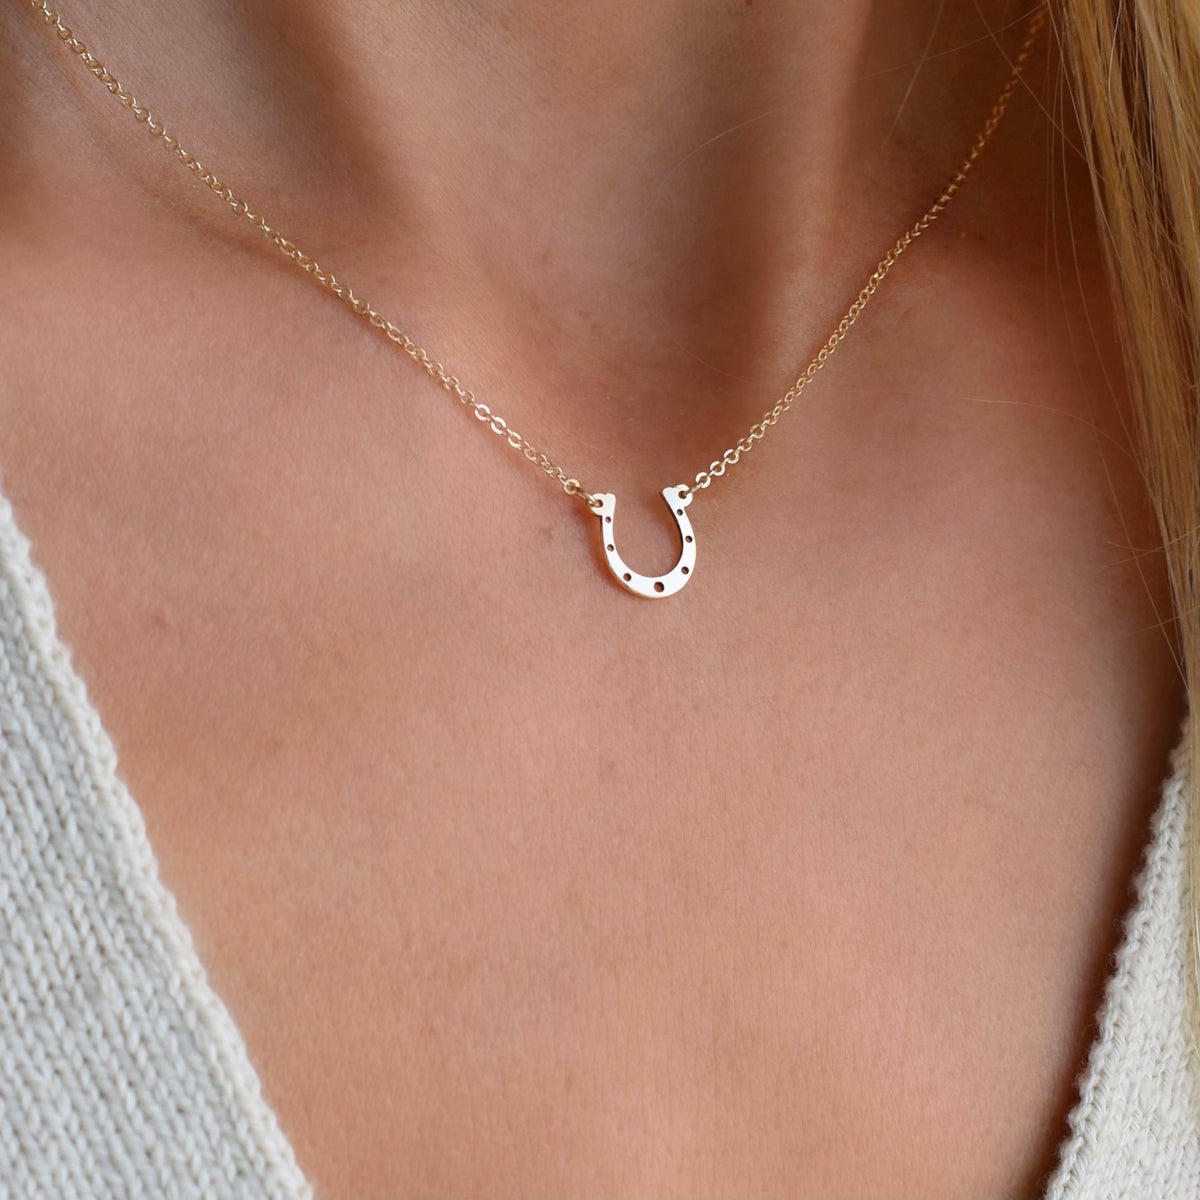 Small Flat Horseshoe Necklace in 14k Gold